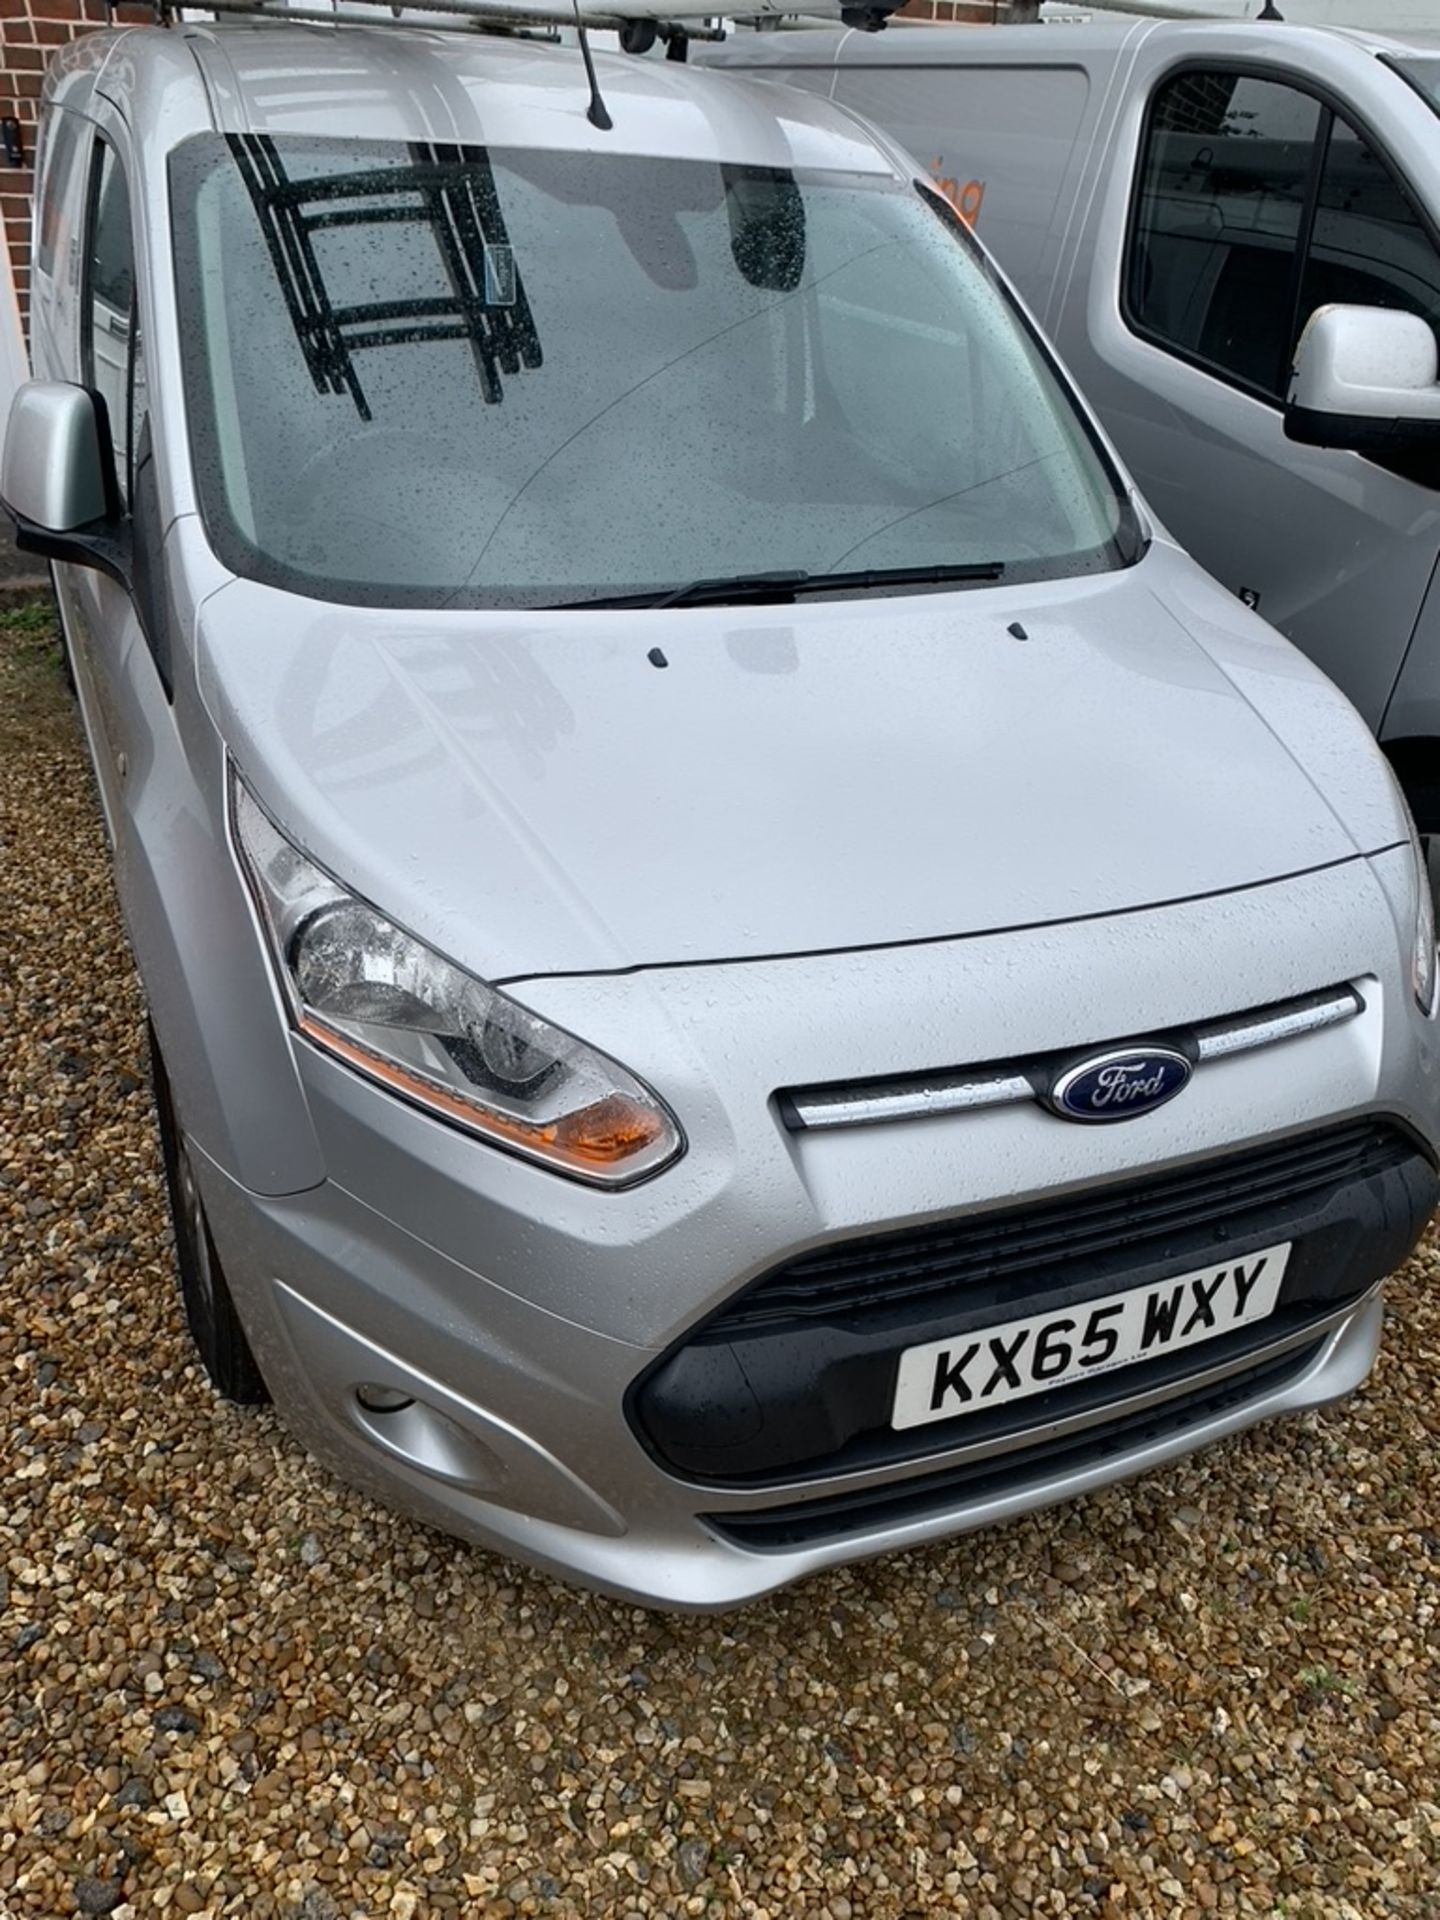 KX65 WXY Ford Transit Connect 240 Limited 83,7018 miles